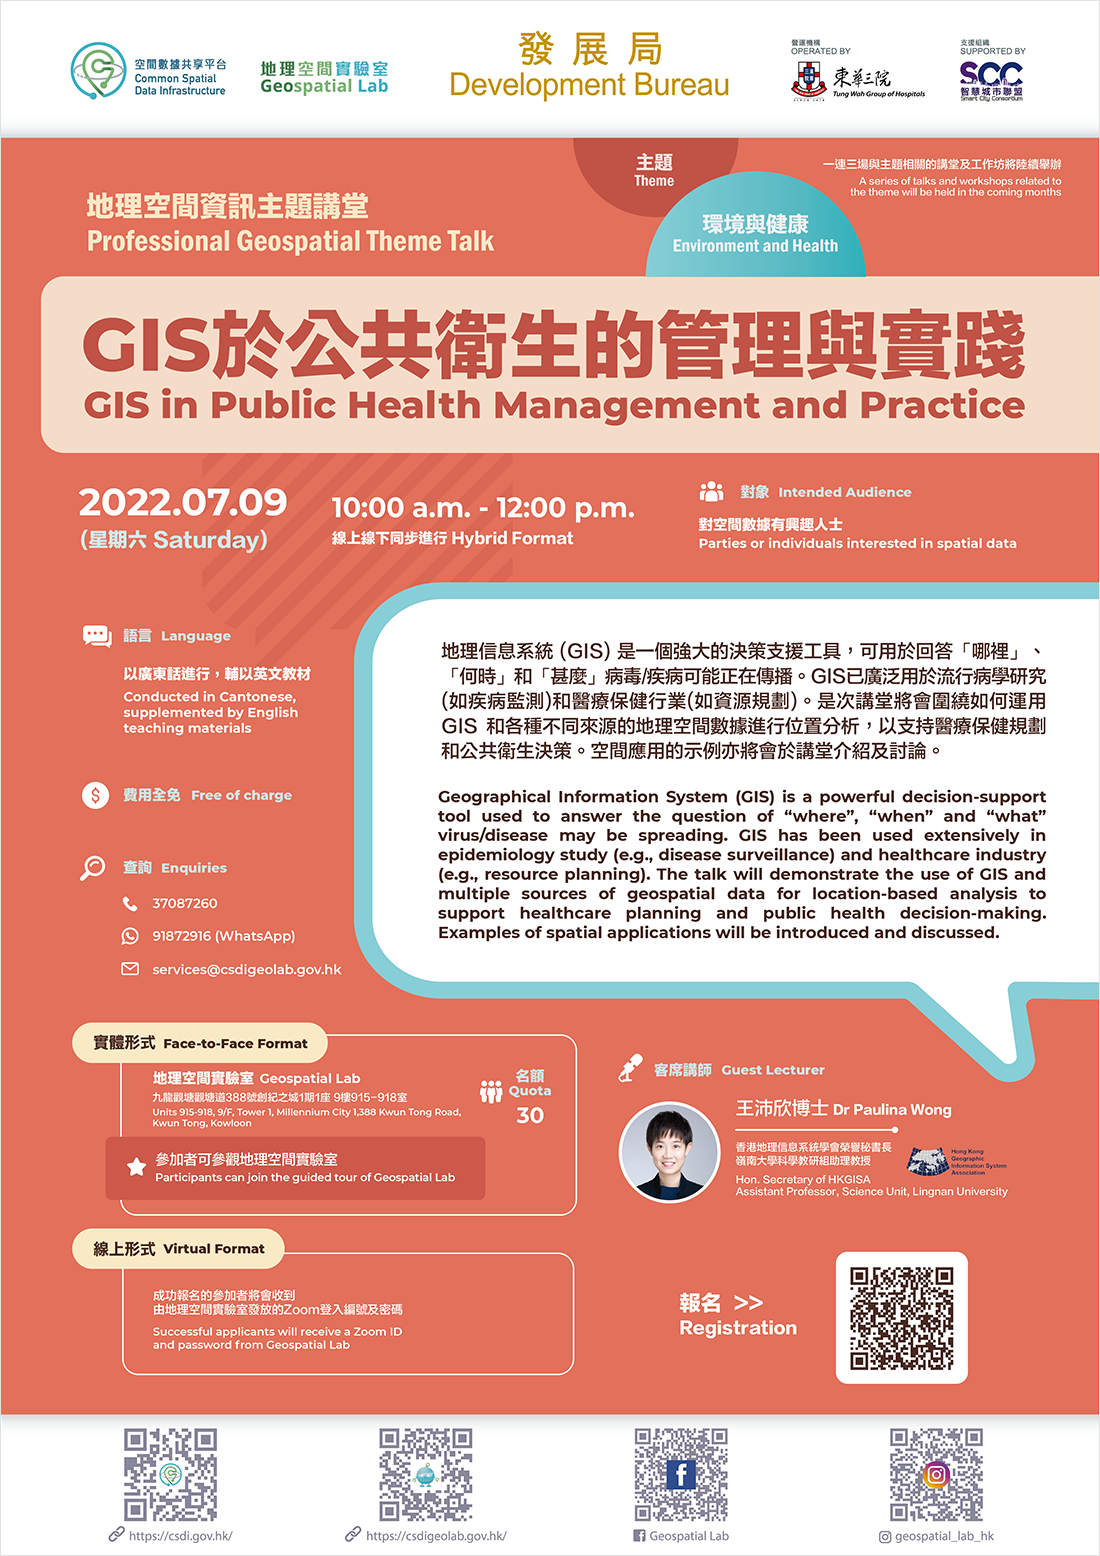 Professional Geospatial Theme Talk - GIS in Public Health Management and Practice